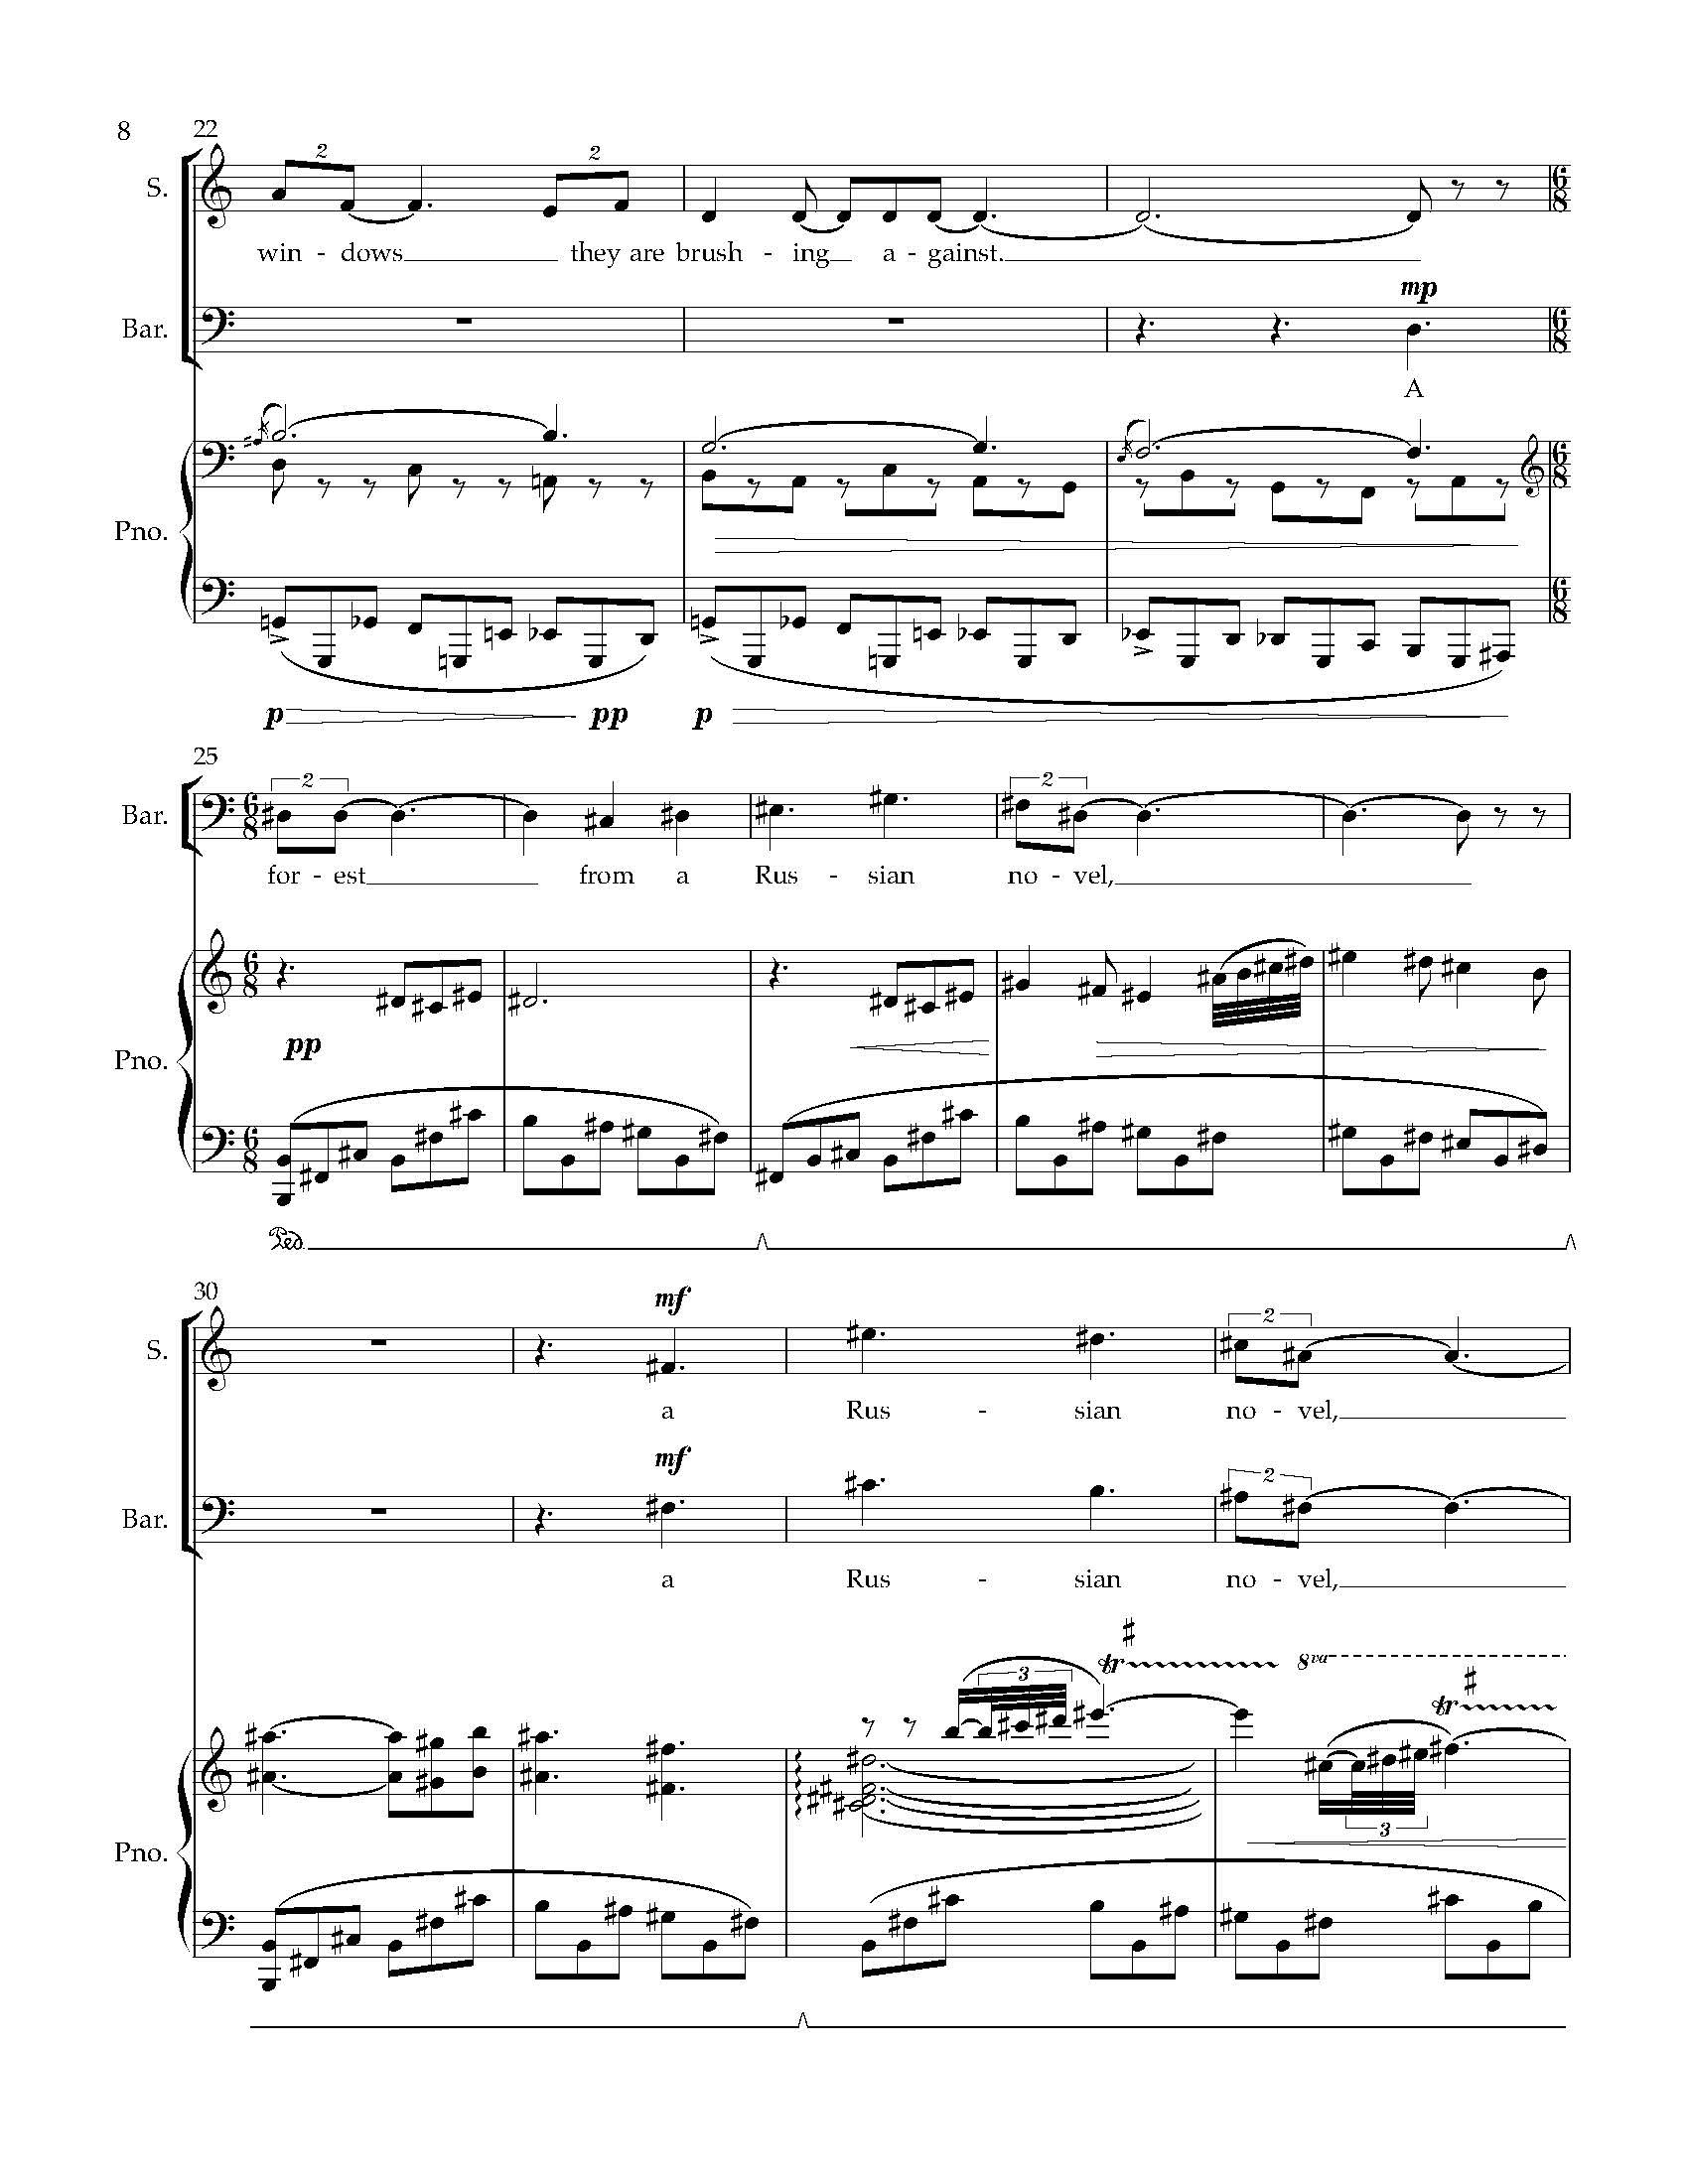 Sky - Complete Score (Revised)_Page_14.jpg